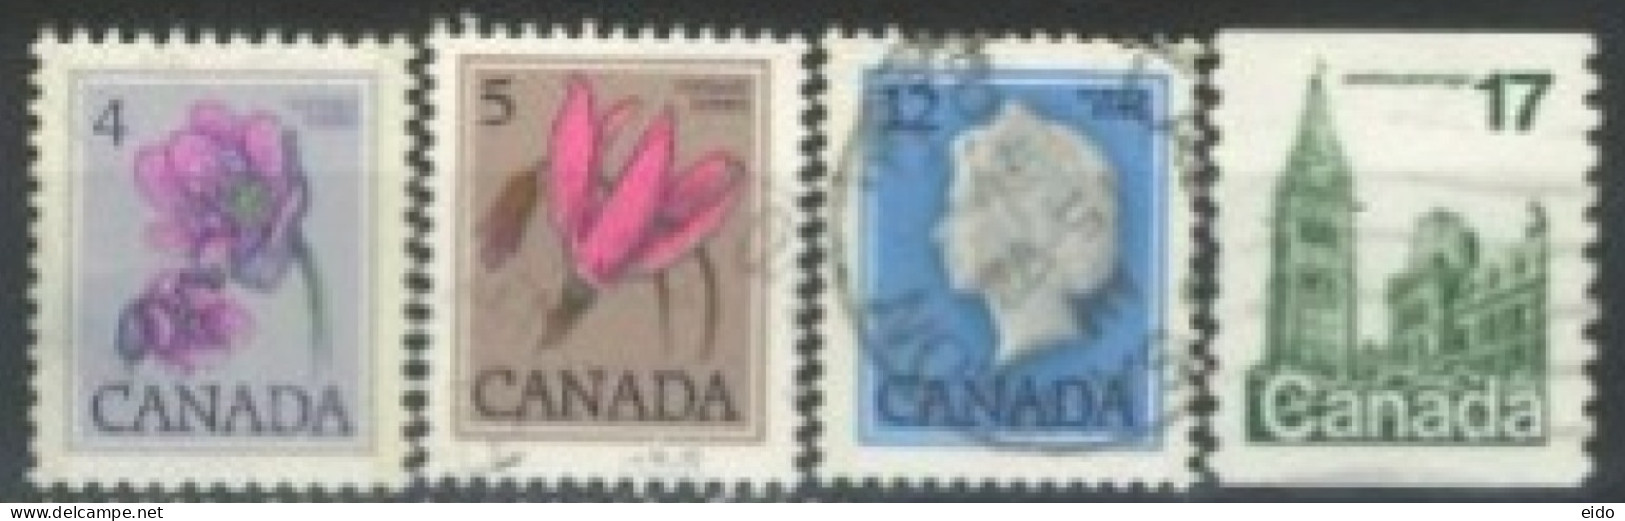 CANADA - 1977, QUEEN ELIZABETH II, FLOWERS & HOUSE OF PARLIAMENTSTAMPS SET OF 4, USED. - Usati